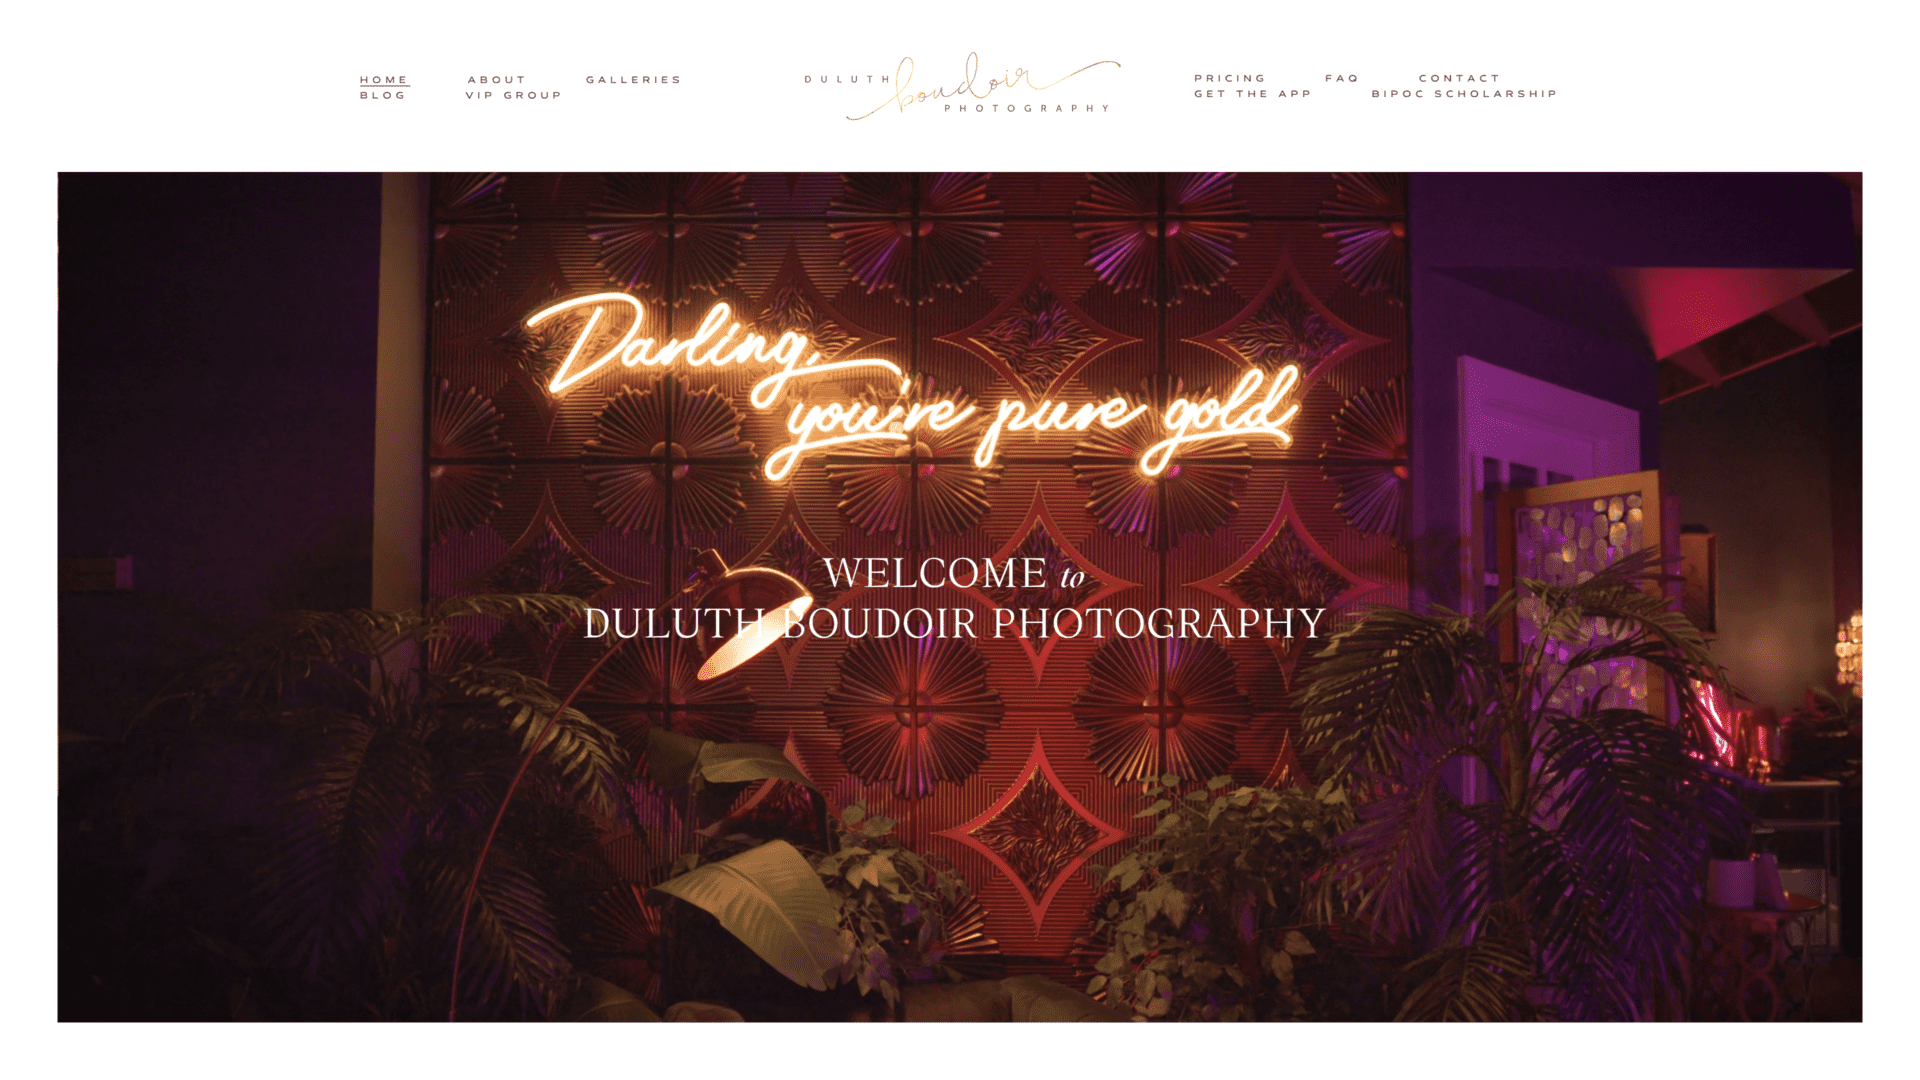 A screenshot of the duluth boudoir photography homepage